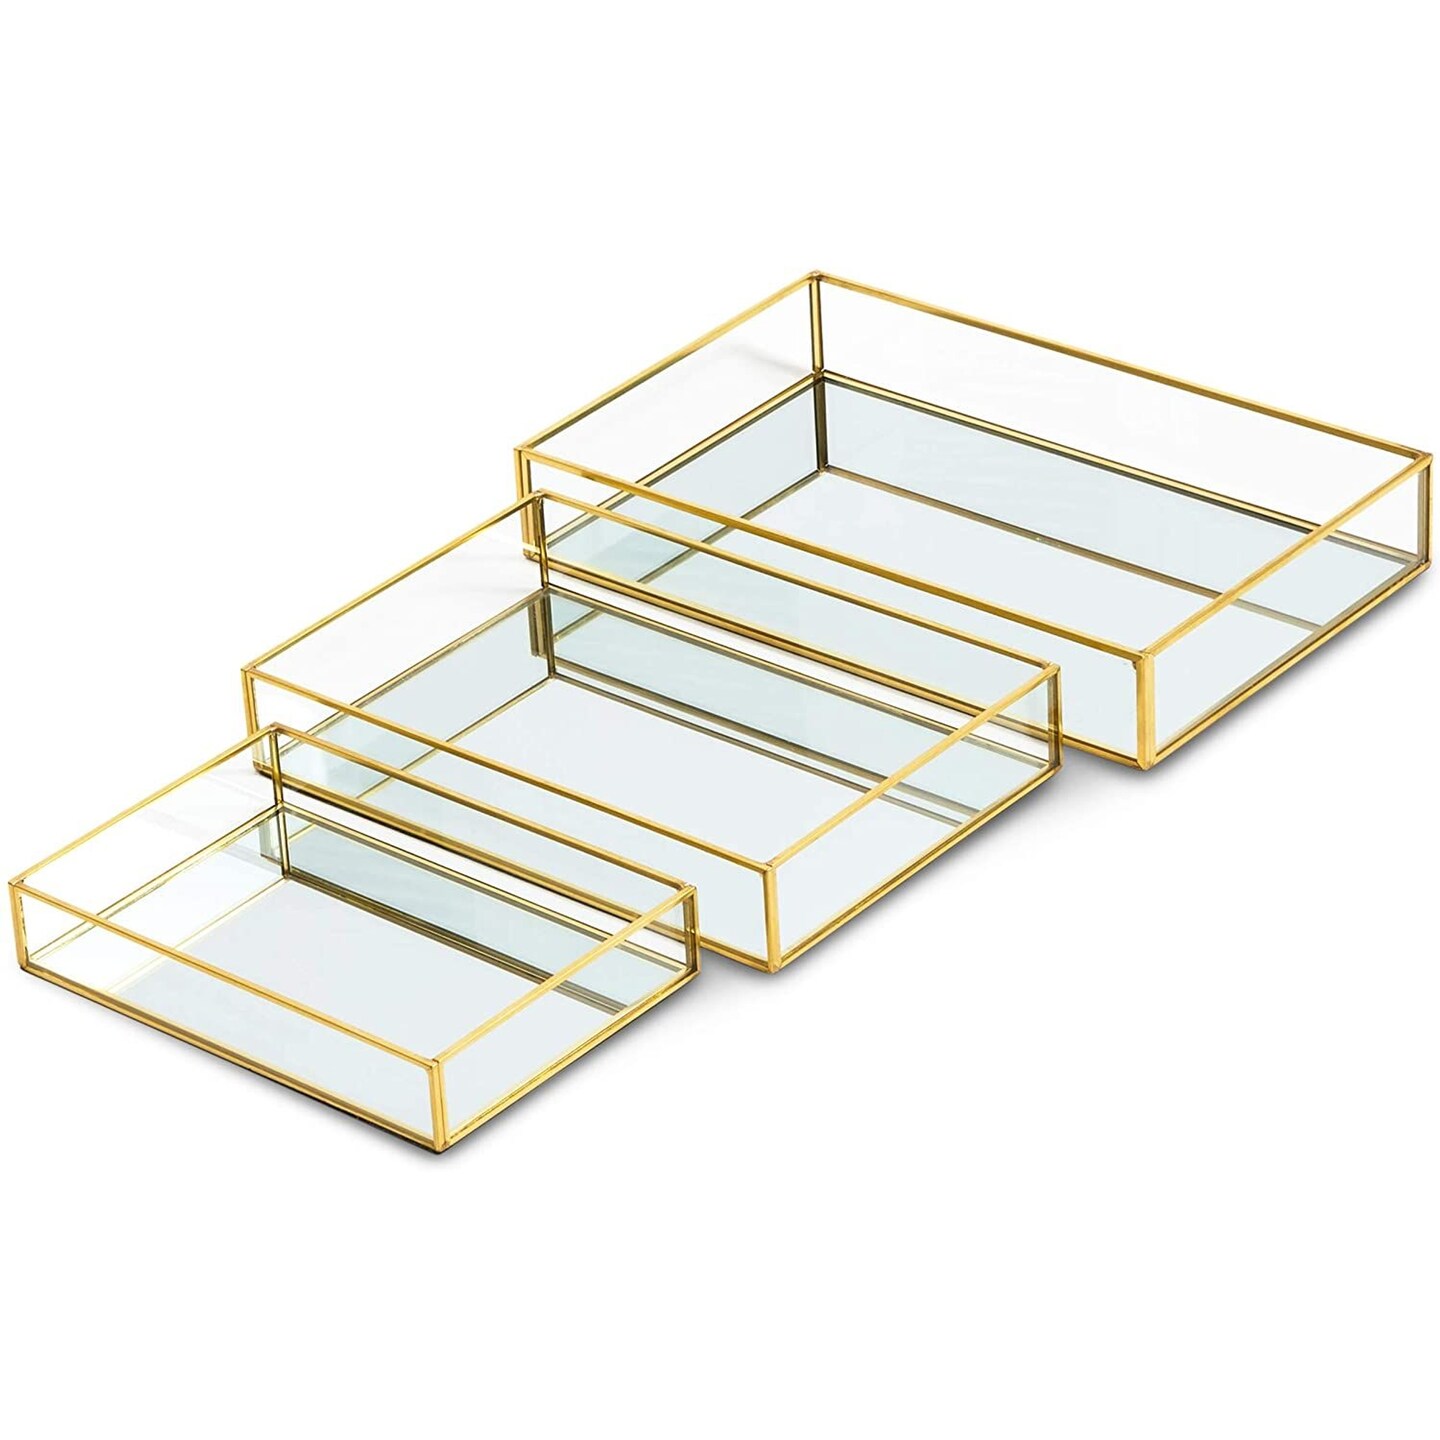 Set of 3 Gold Mirror Vanity Tray for Perfume, Makeup, Decorative Rectangle Jewelry Organizer for Bathroom, Dresser (3 Sizes)